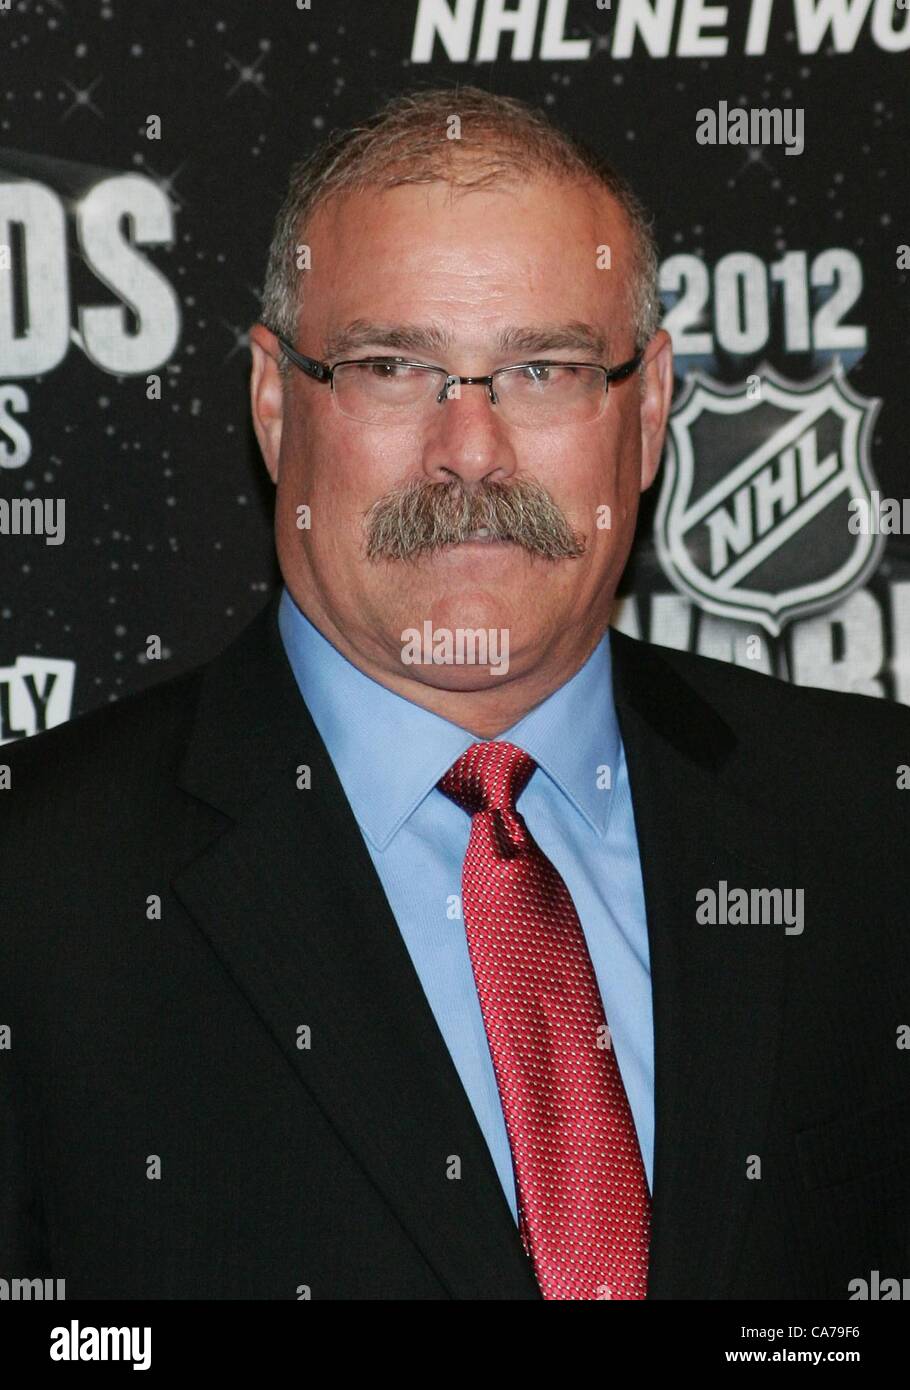 Paul MacLean in attendance for 2012 National Hockey League NHL Awards, Encore Theater at the Wynn Las Vegas, Las Vegas, NV June 20, 2012. Photo By: James Atoa/Everett Collection Stock Photo